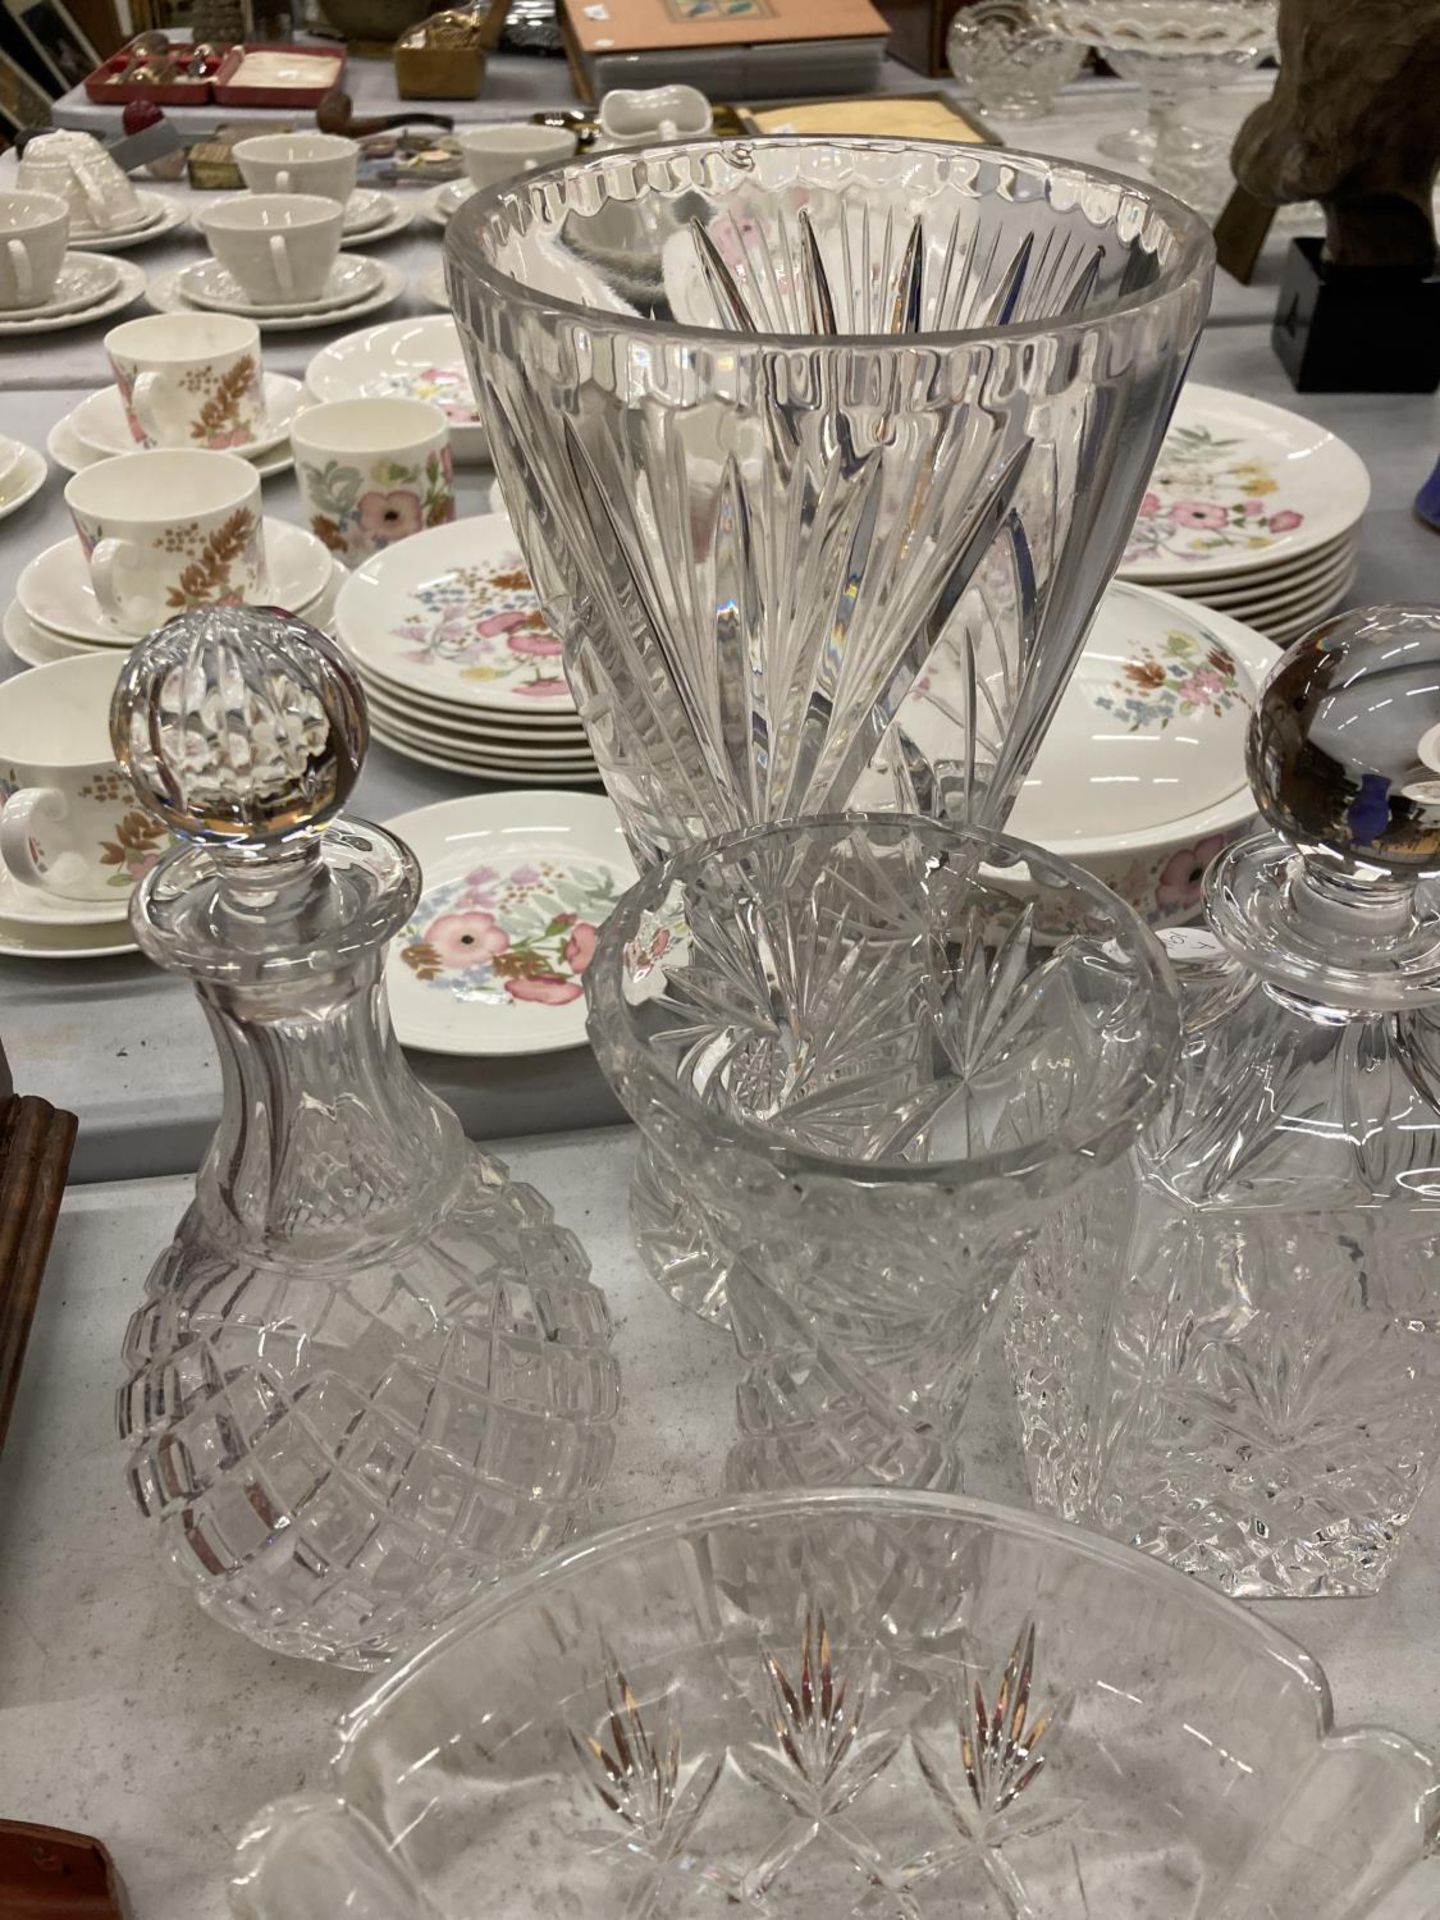 A QUANTITY OF CUT GLASS CRYSTAL GLASS TO INCLUDE VASES, BOWLS, DECANTERS, ETC - Image 4 of 4